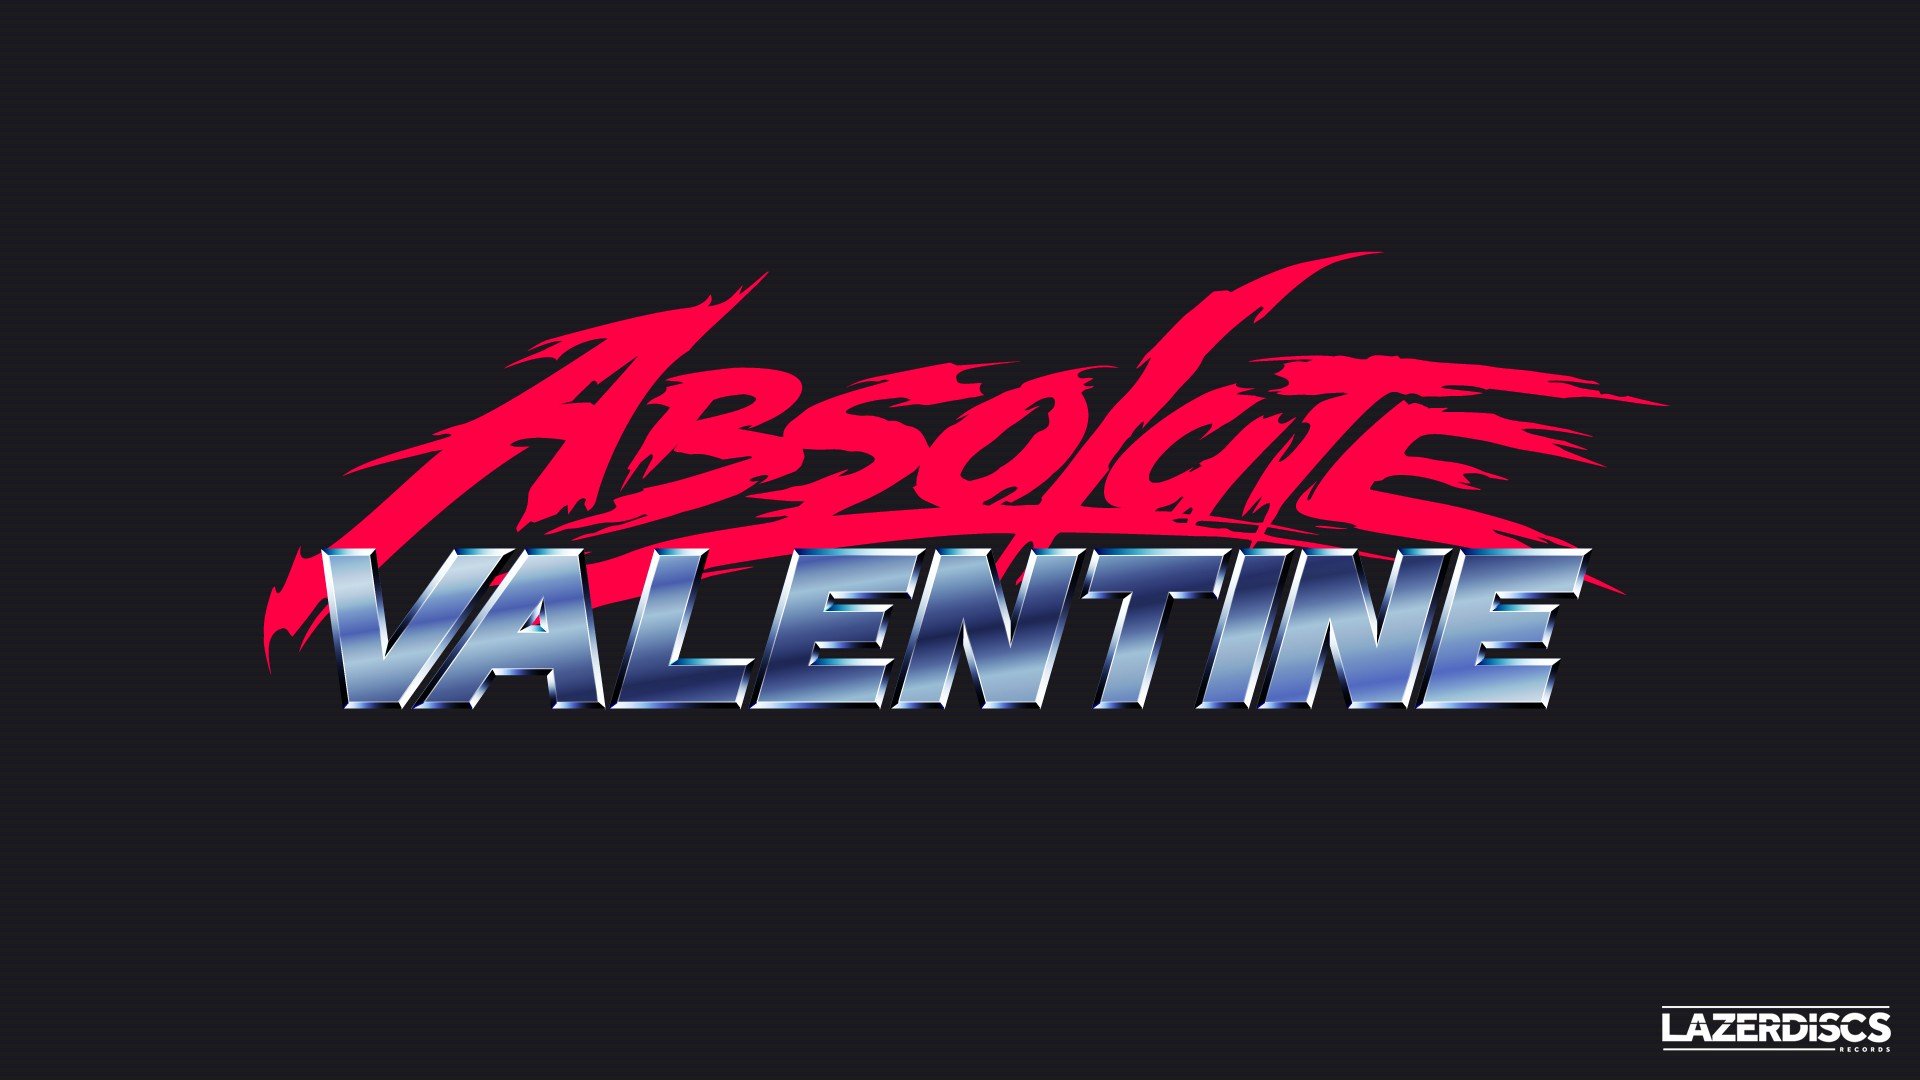 absolute valentine, Synthwave, 1980s, Text, New Retro Wave, Logo, Neon Wallpaper